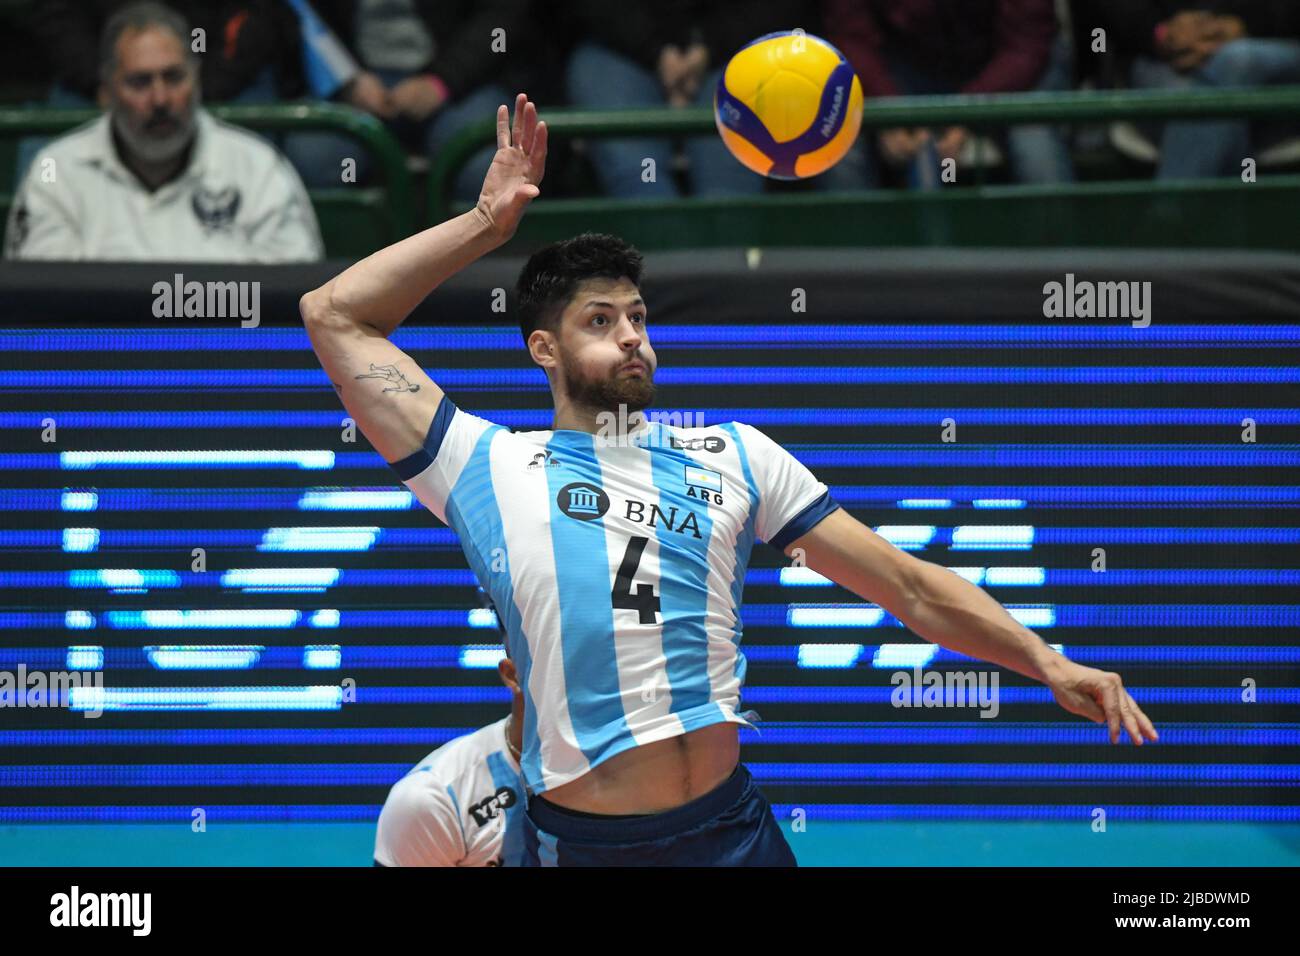 Joaquin Gallego (Argentina) vs. Netherlands. Exhibition game, Buenos Aires. Stock Photo